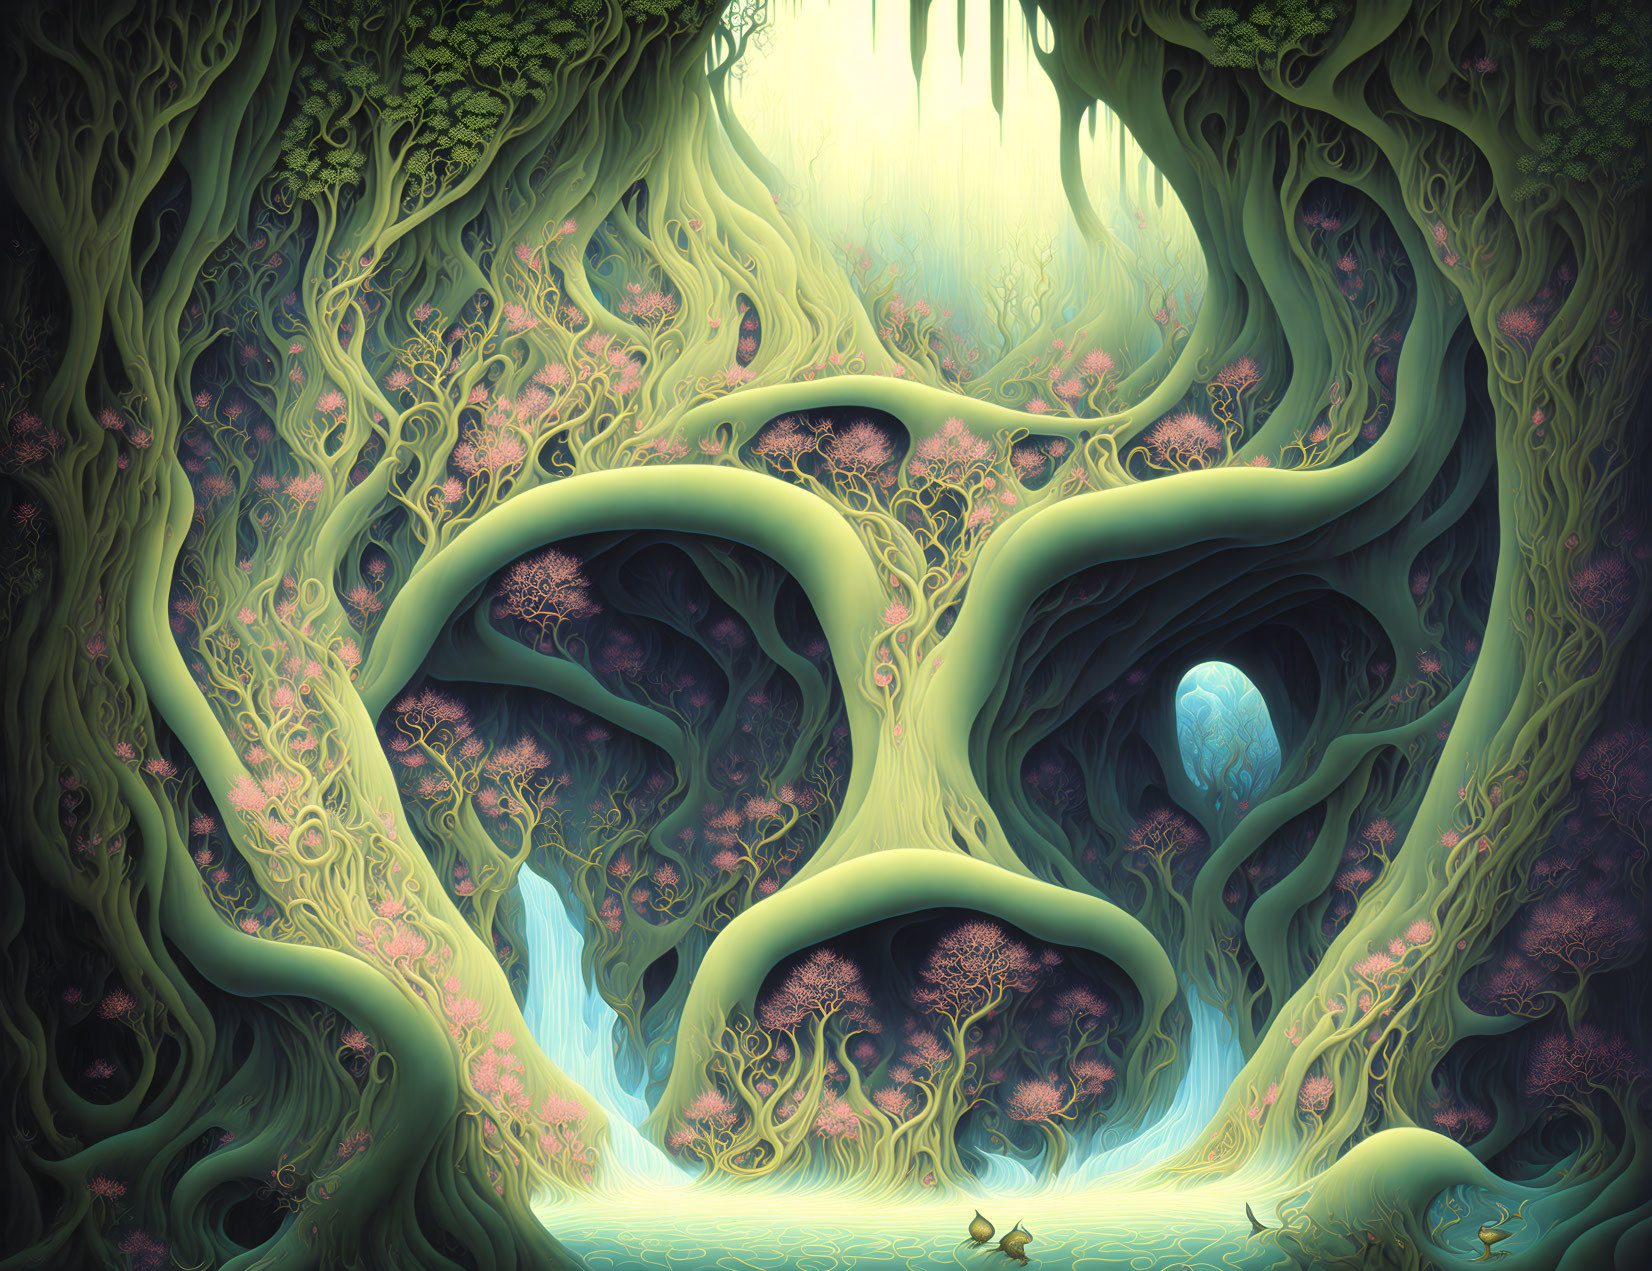 Mystical forest scene with twisting trees and glowing orbs